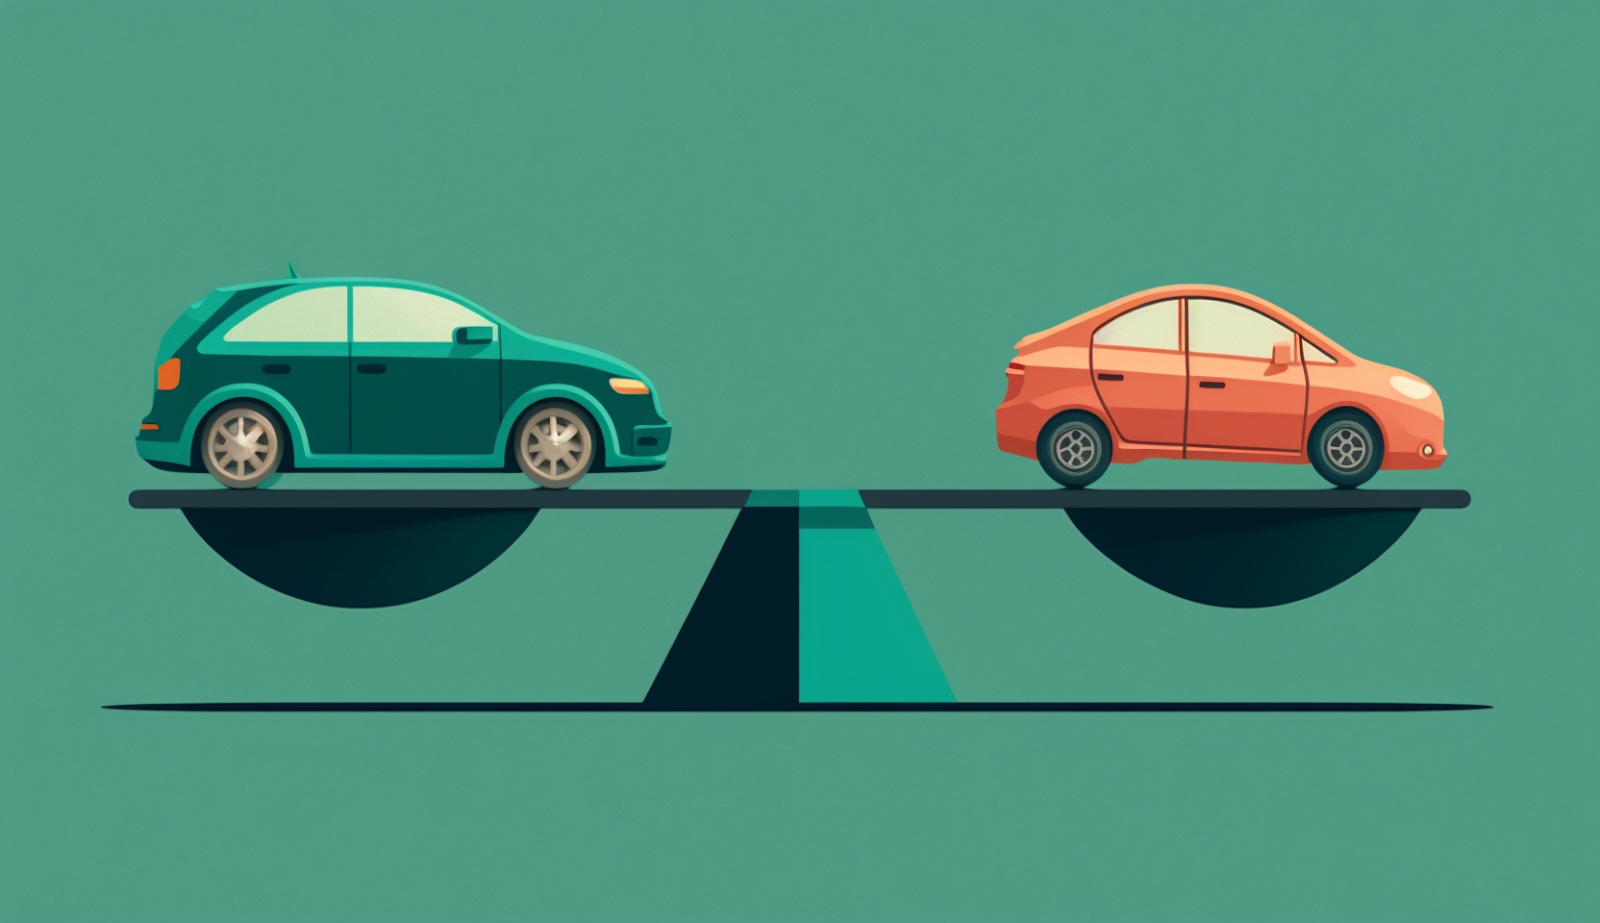 Finance vs. Lease: Which is the Better Option for Car Ownership?